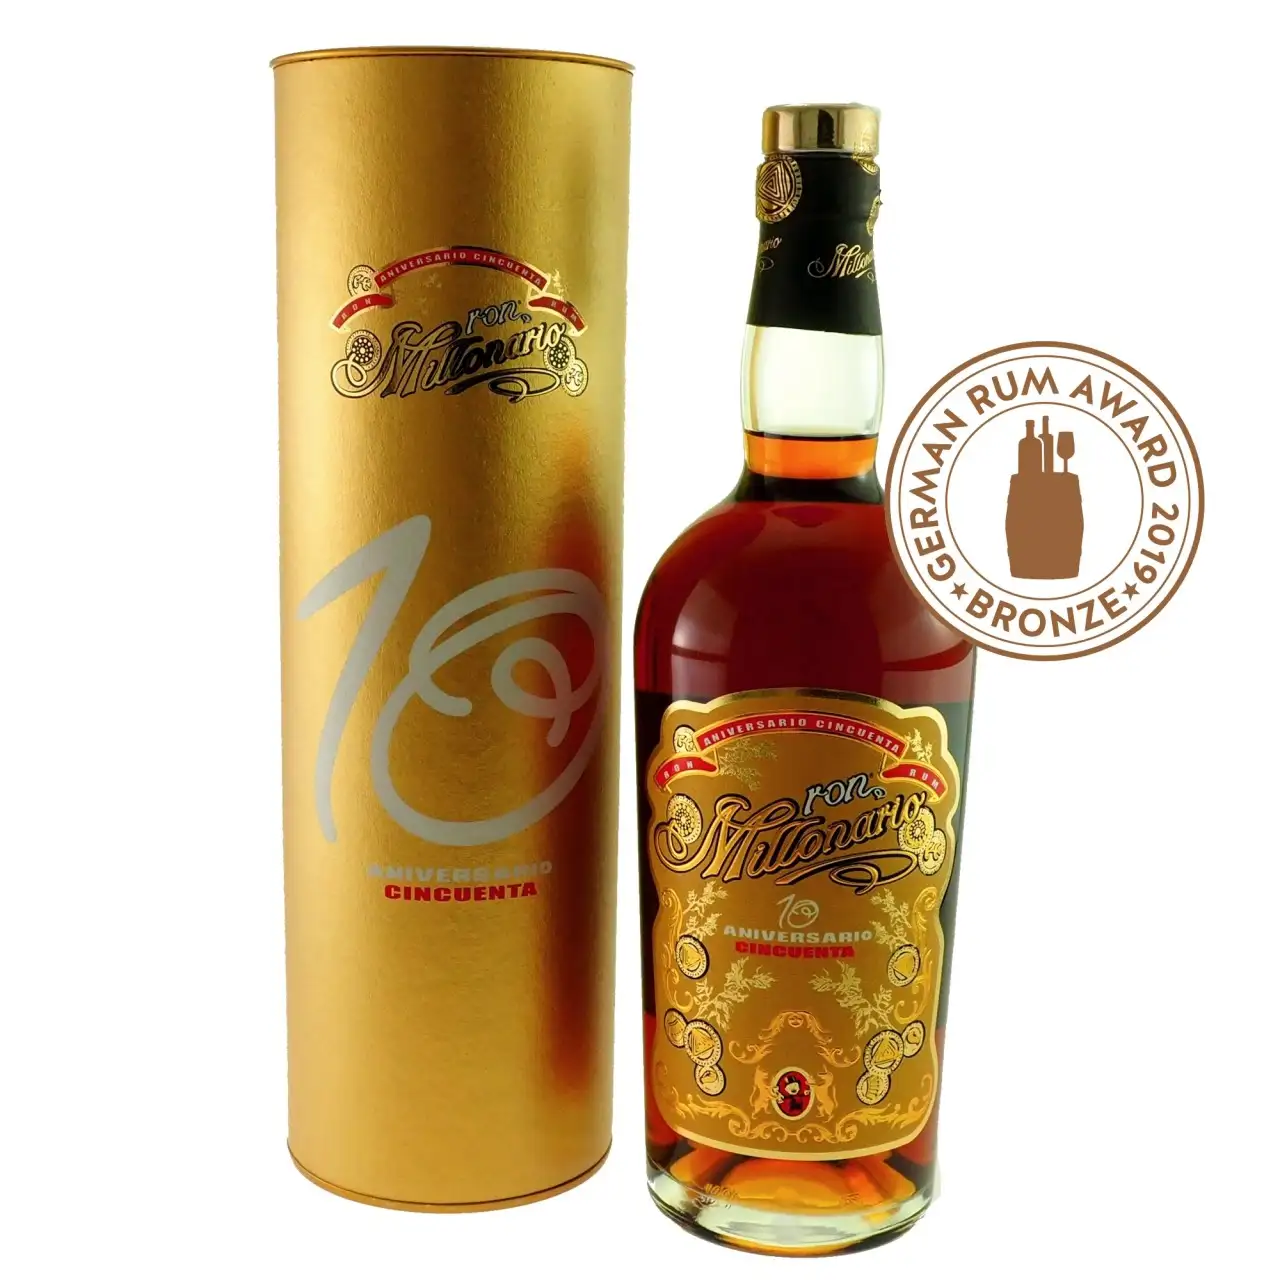 Image of the front of the bottle of the rum Millonario 10 Aniversario Cincuenta